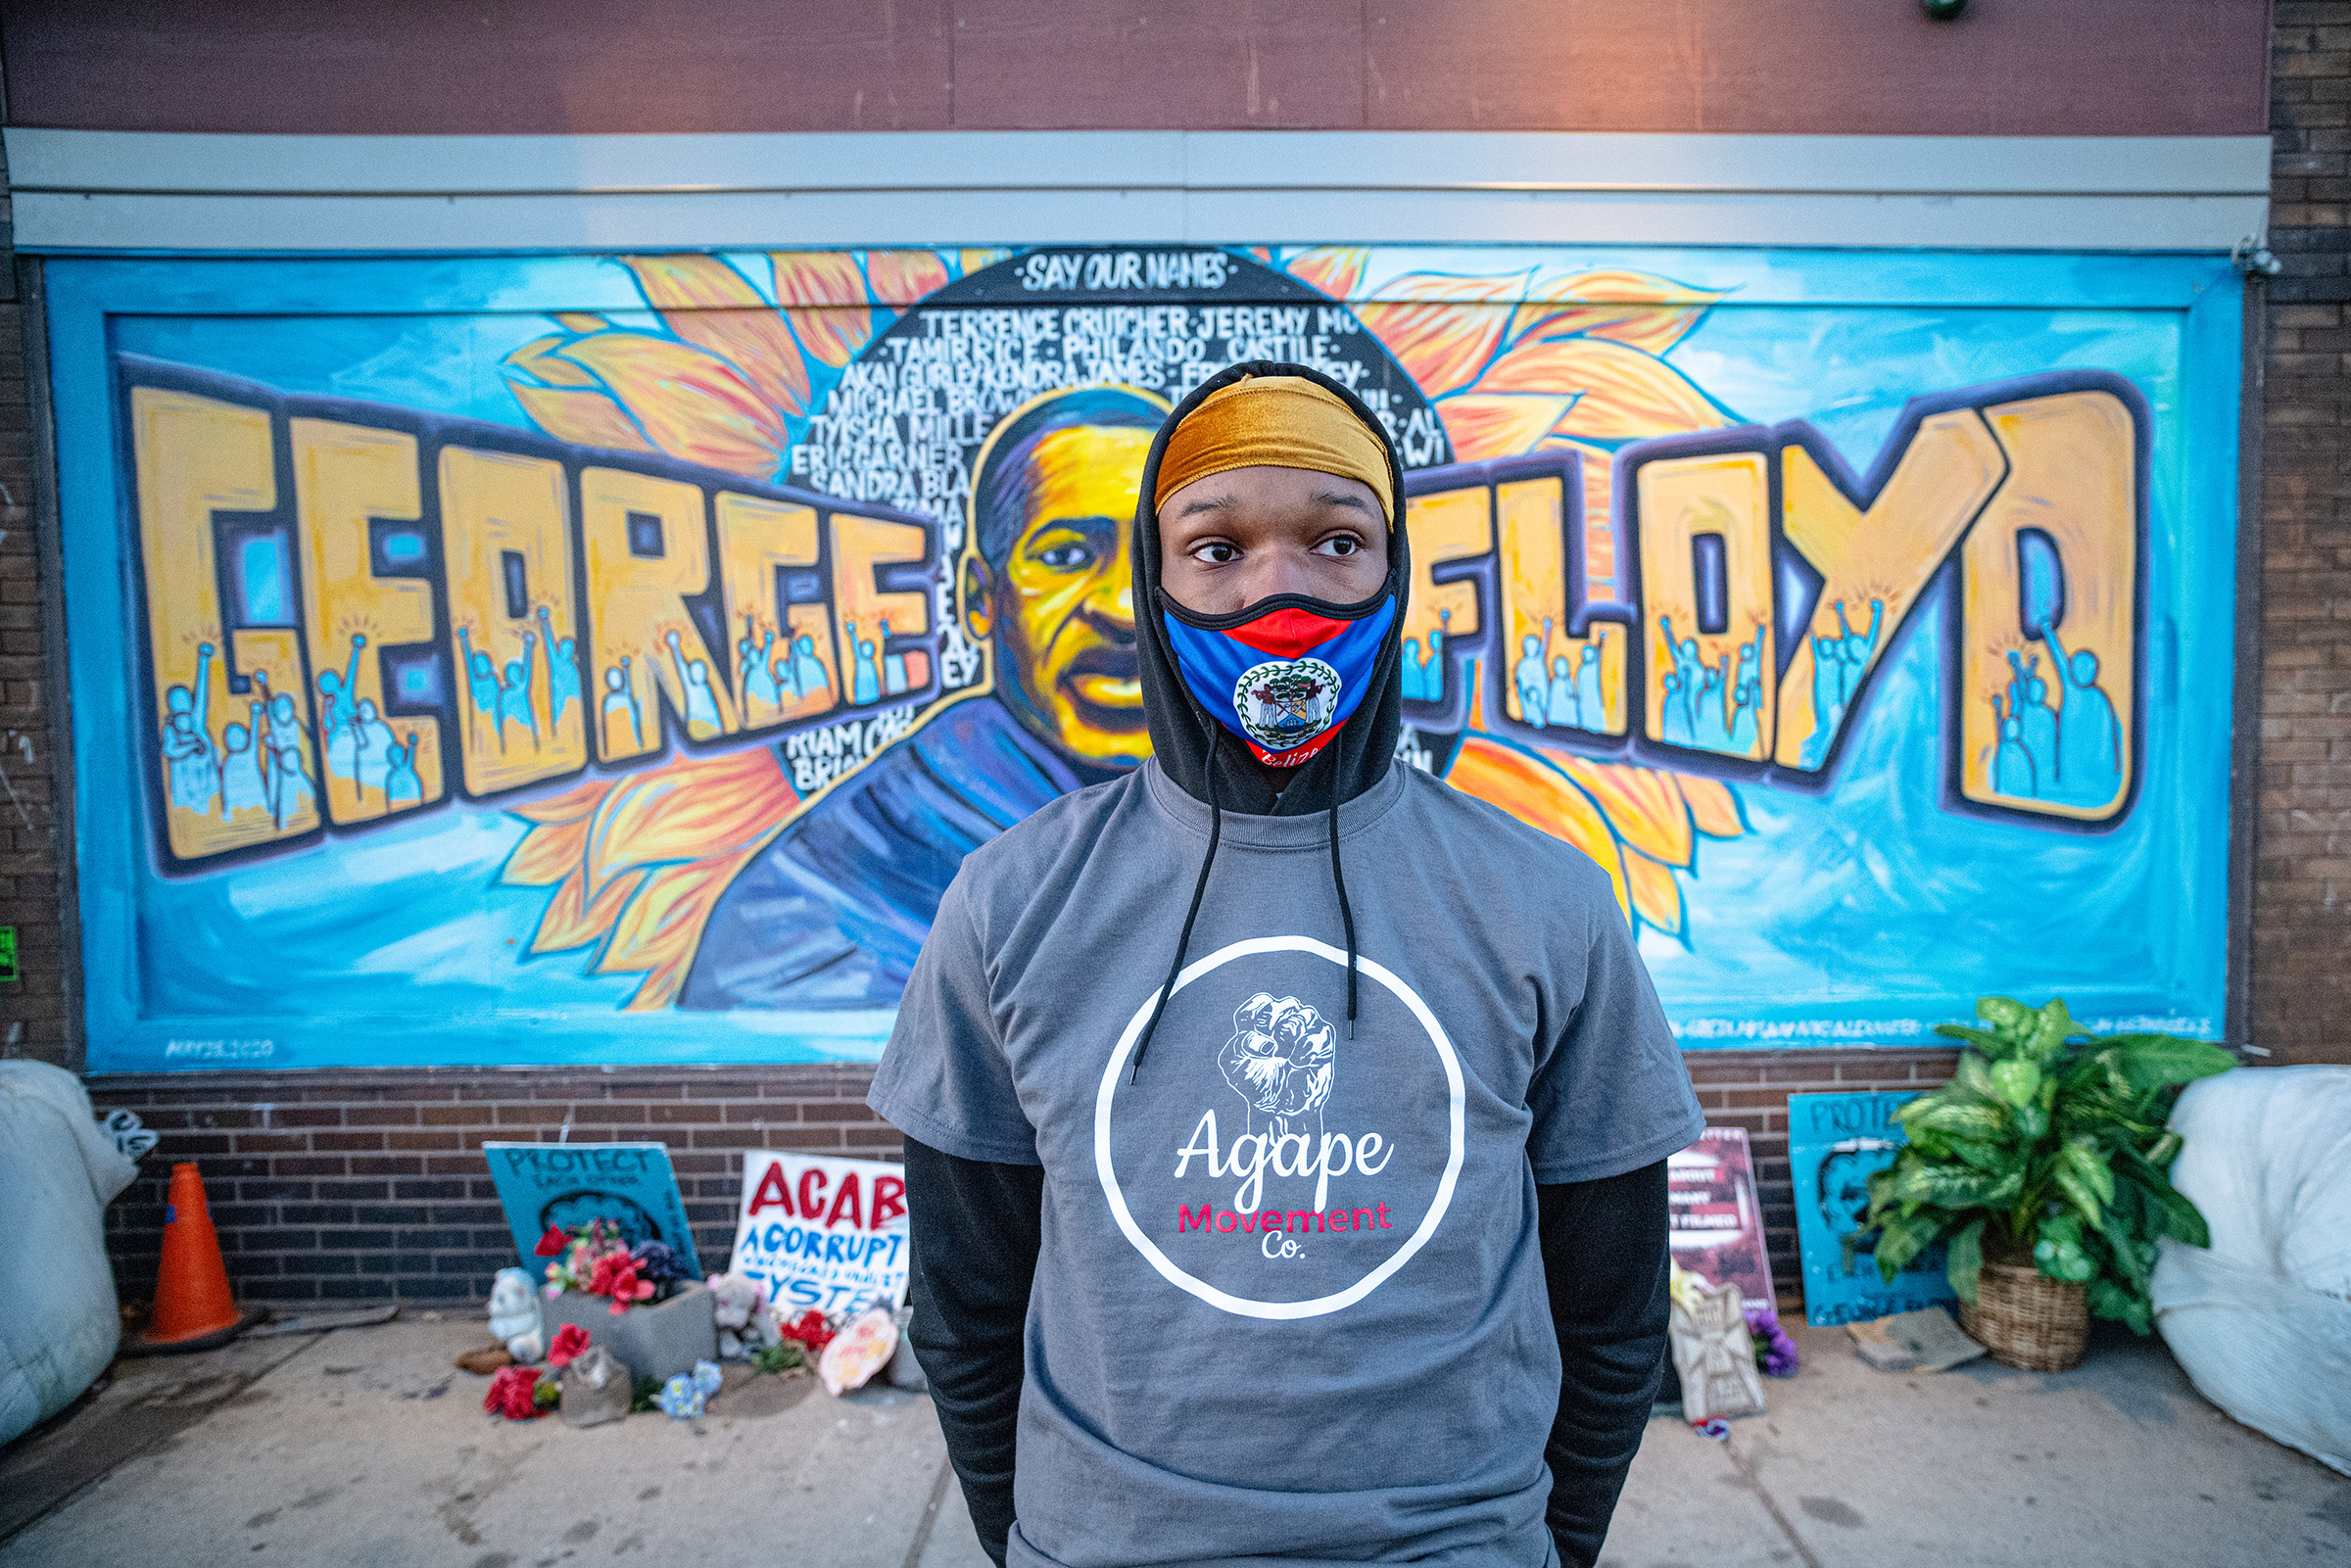 Ijahvonn Waller, 16, stands in front of a mural of Floyd painted on a wall of Cup Foods, near where Floyd died. Waller was preparing to join the members of Agape. (Ruddy Roye for TIME)